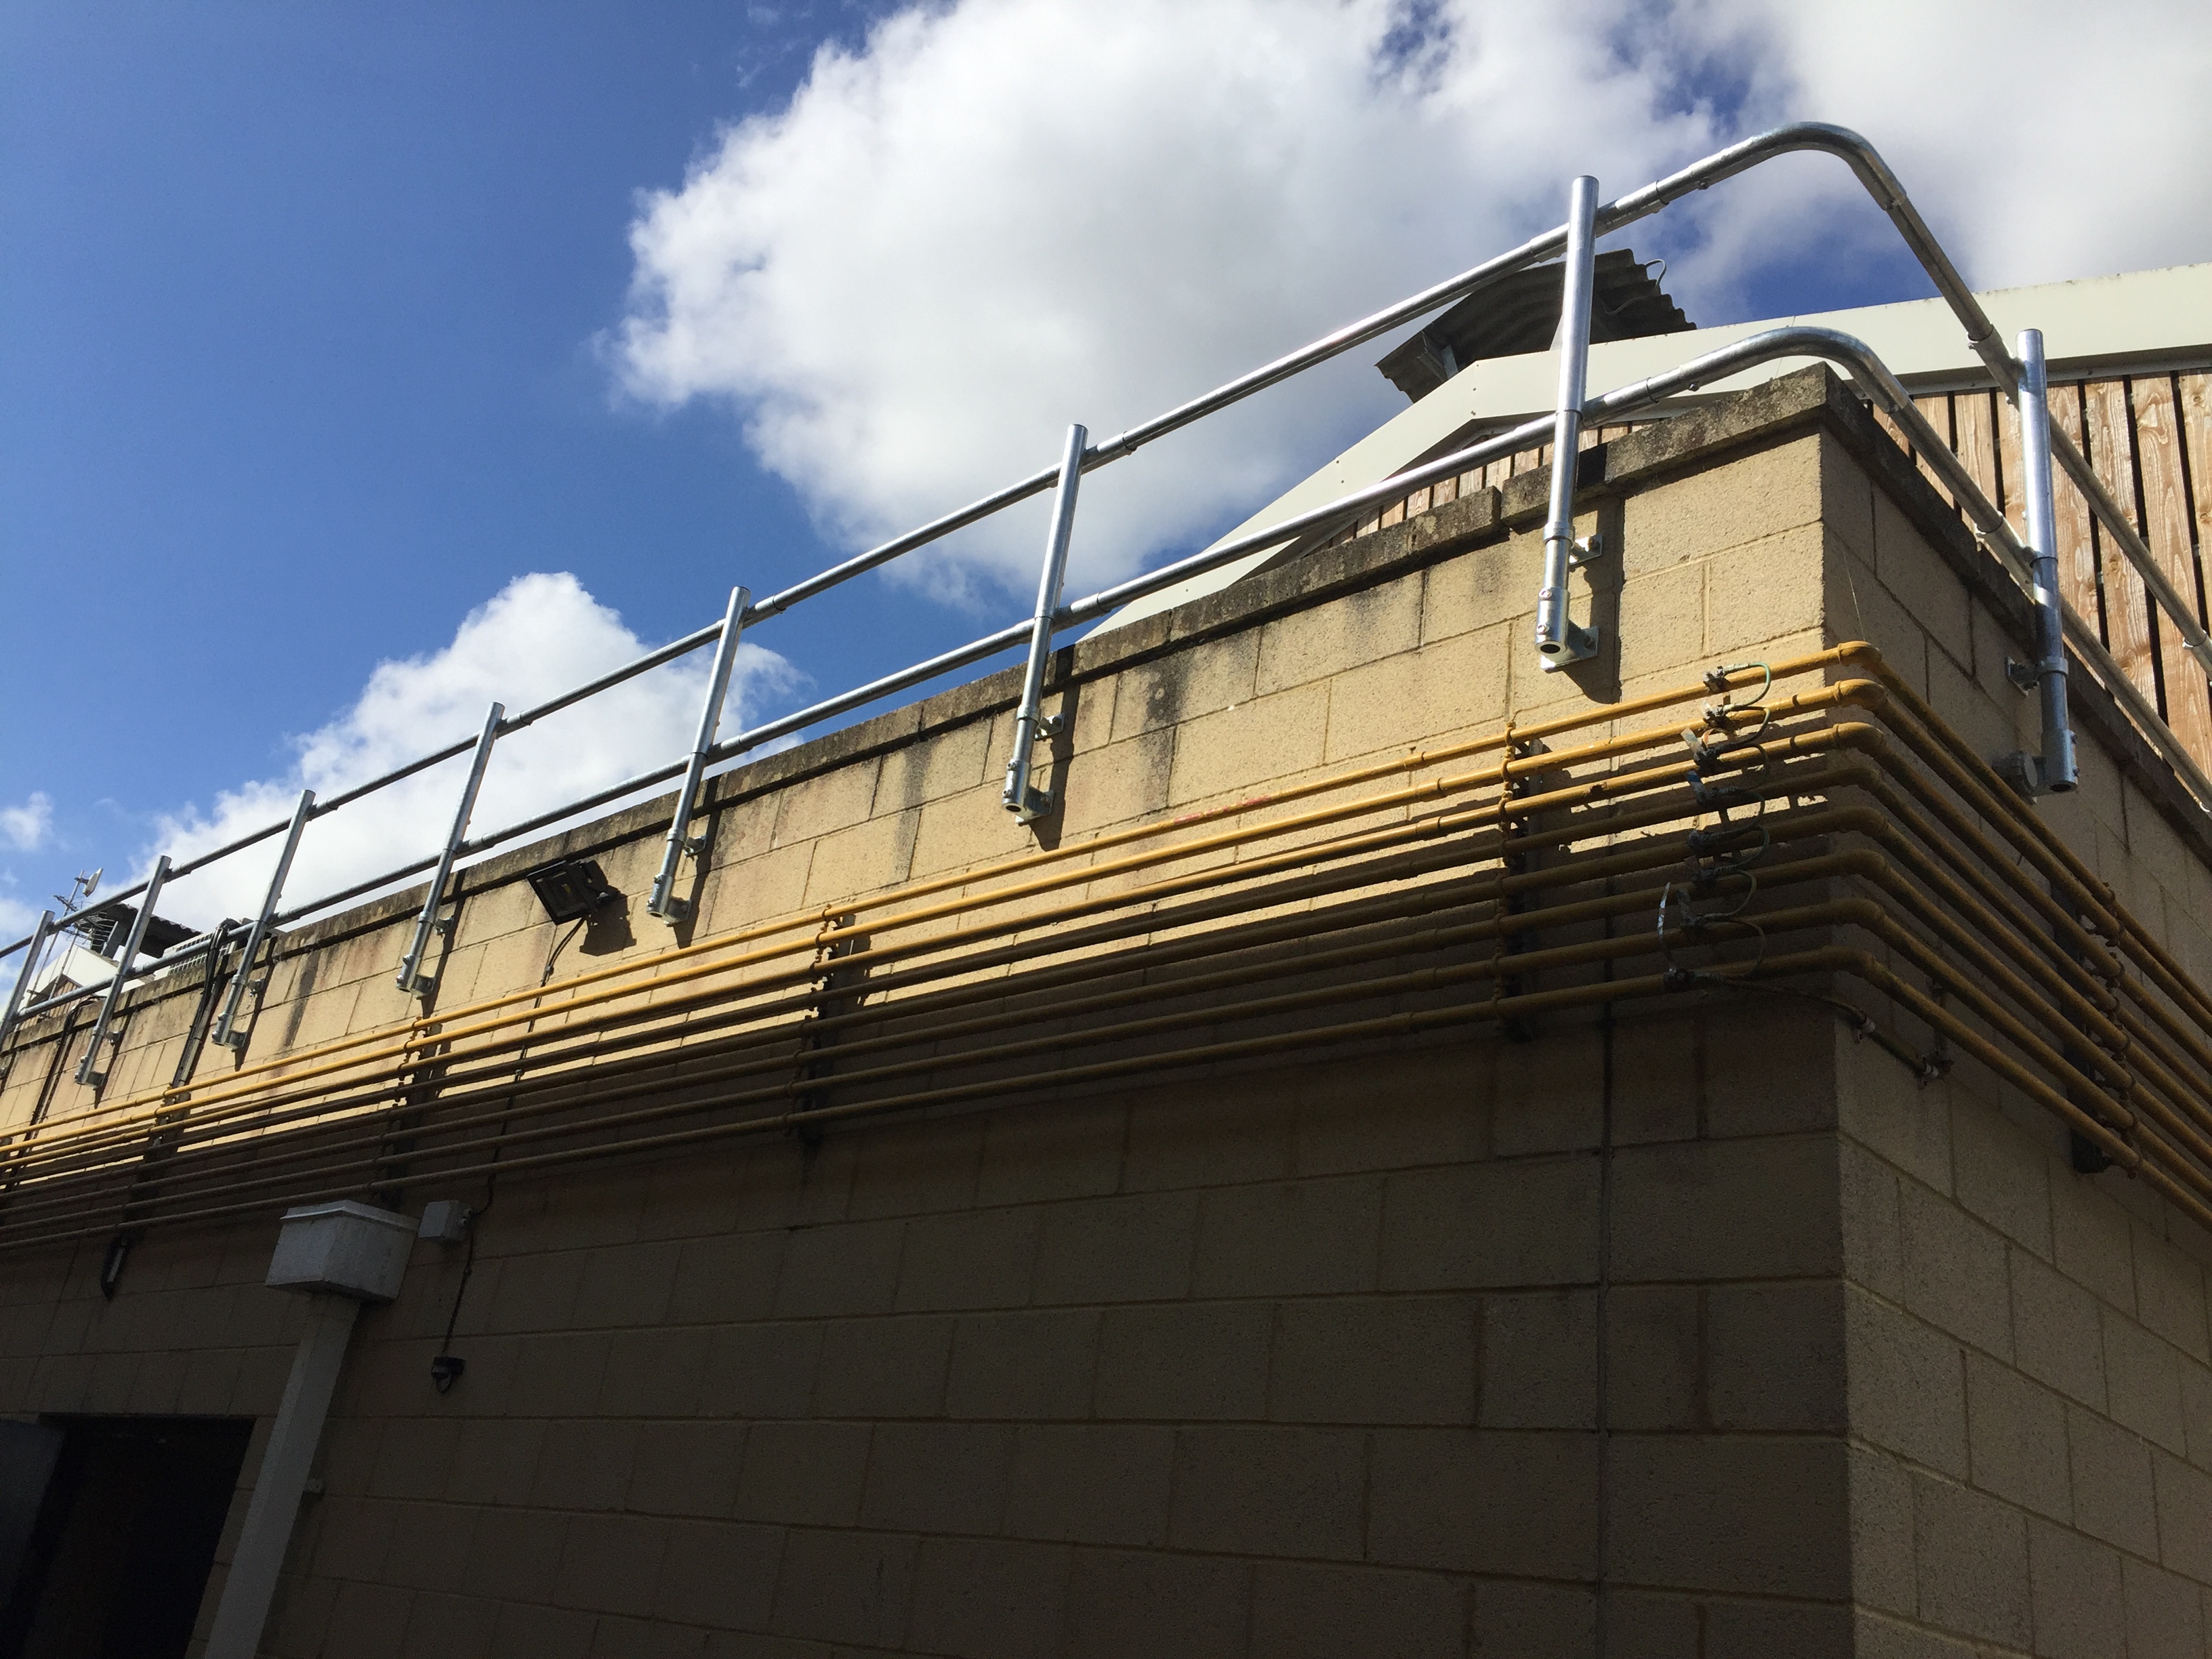 Fixed Parapet Handrails & Guardrails for Fixed Edge Protection